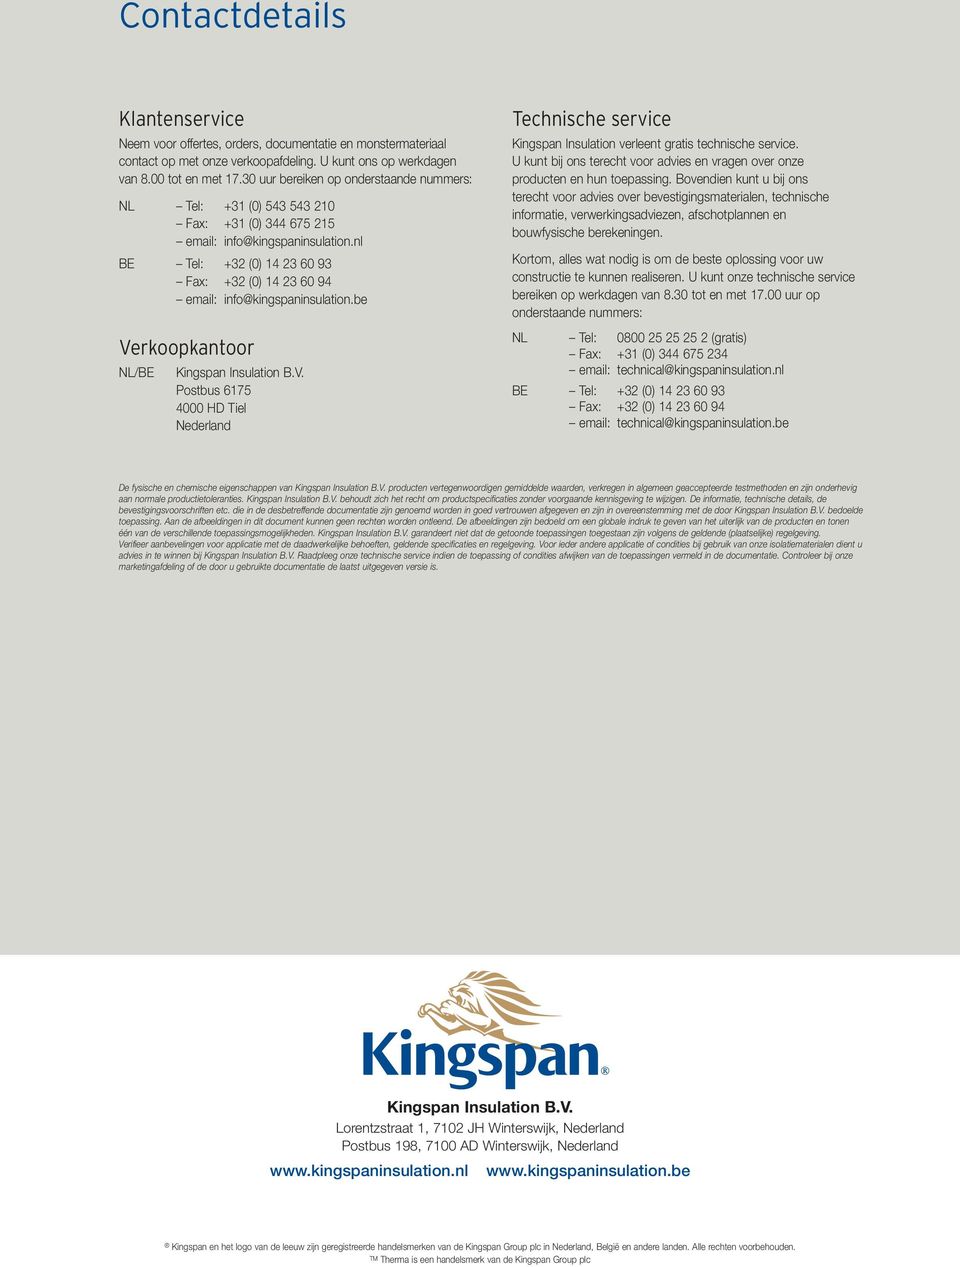 nl BE Tel: +32 (0) 14 23 60 93 Fax: +32 (0) 14 23 60 94 email: info@kingspaninsulation.be Ve